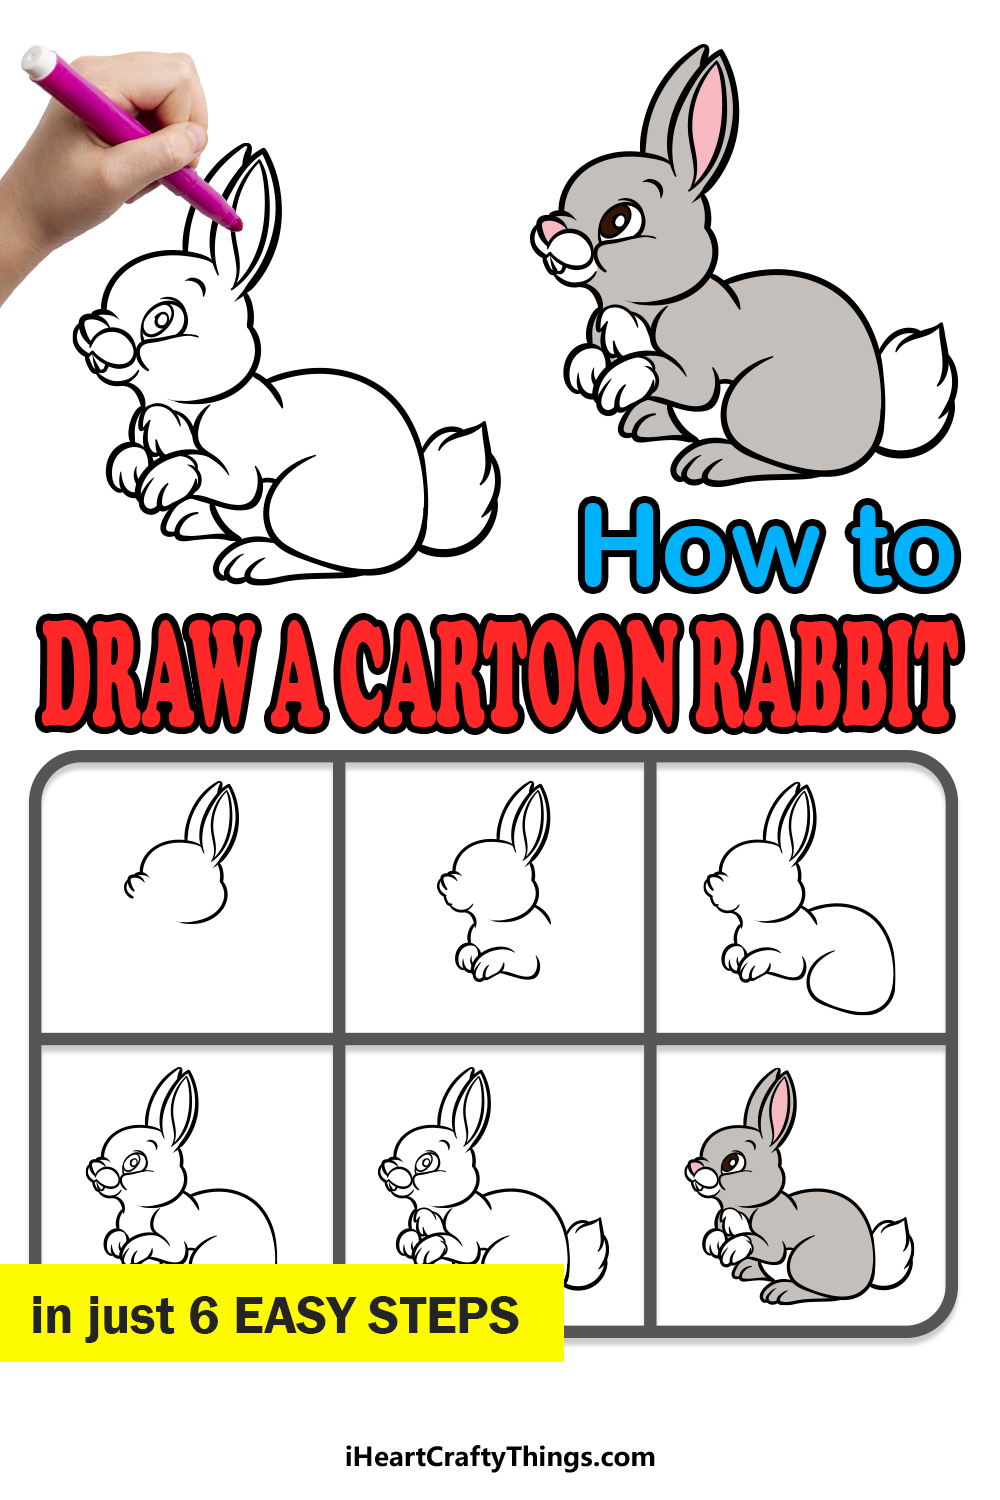 how to draw a cartoon rabbit in 6 easy steps